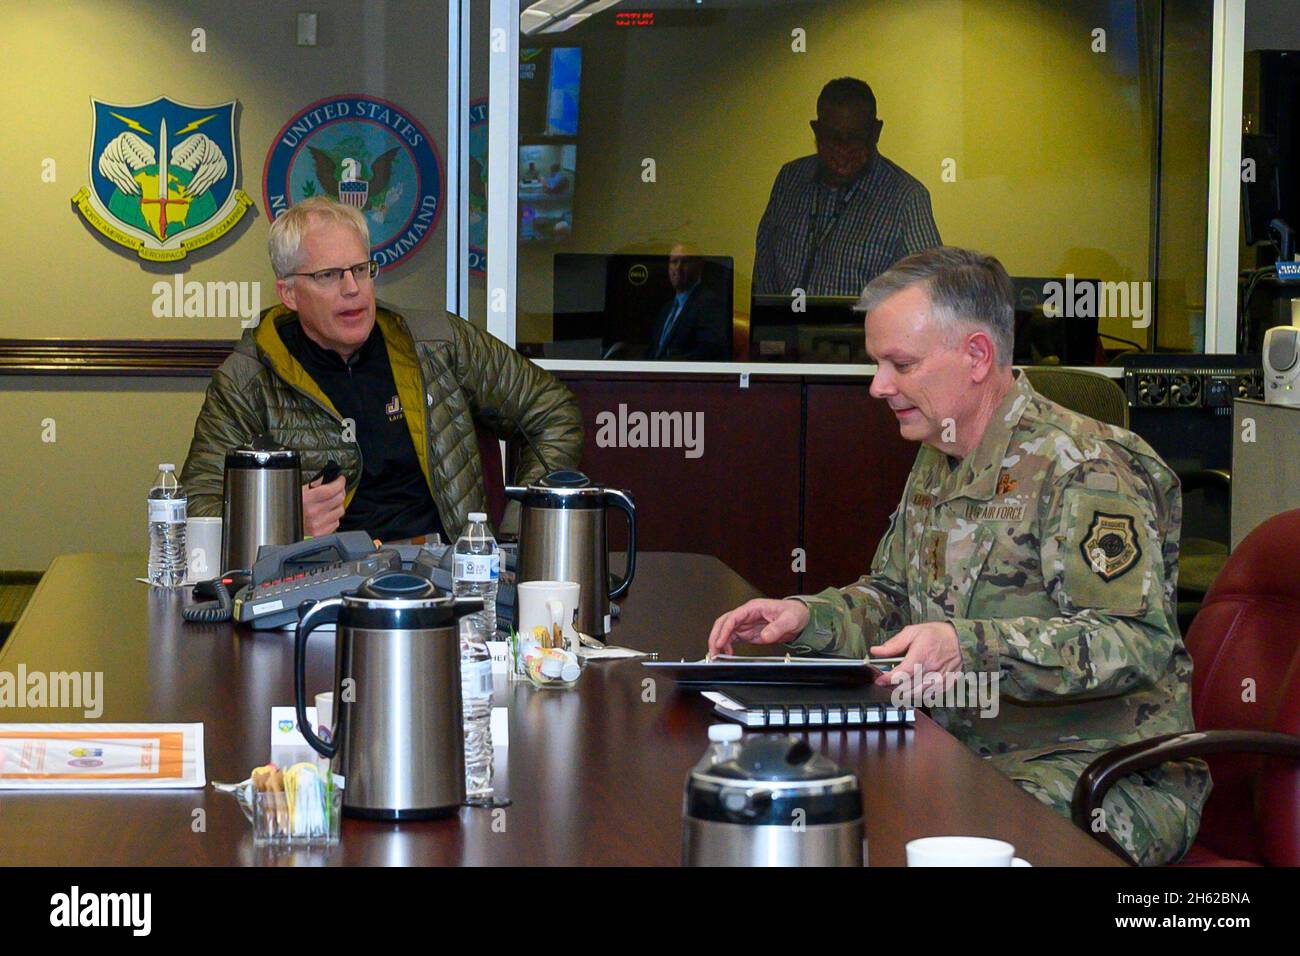 Reportage:  Acting Defense Secretary Chris Miller meets with the commander of North American Aerospace Defense Command and United States Northern Command, Air Force Gen. Glen VanHerck, at NORAD-USNORTHCOM headquarters, Peterson Air Force Base, Colo., Jan. 14, 2021. Stock Photo